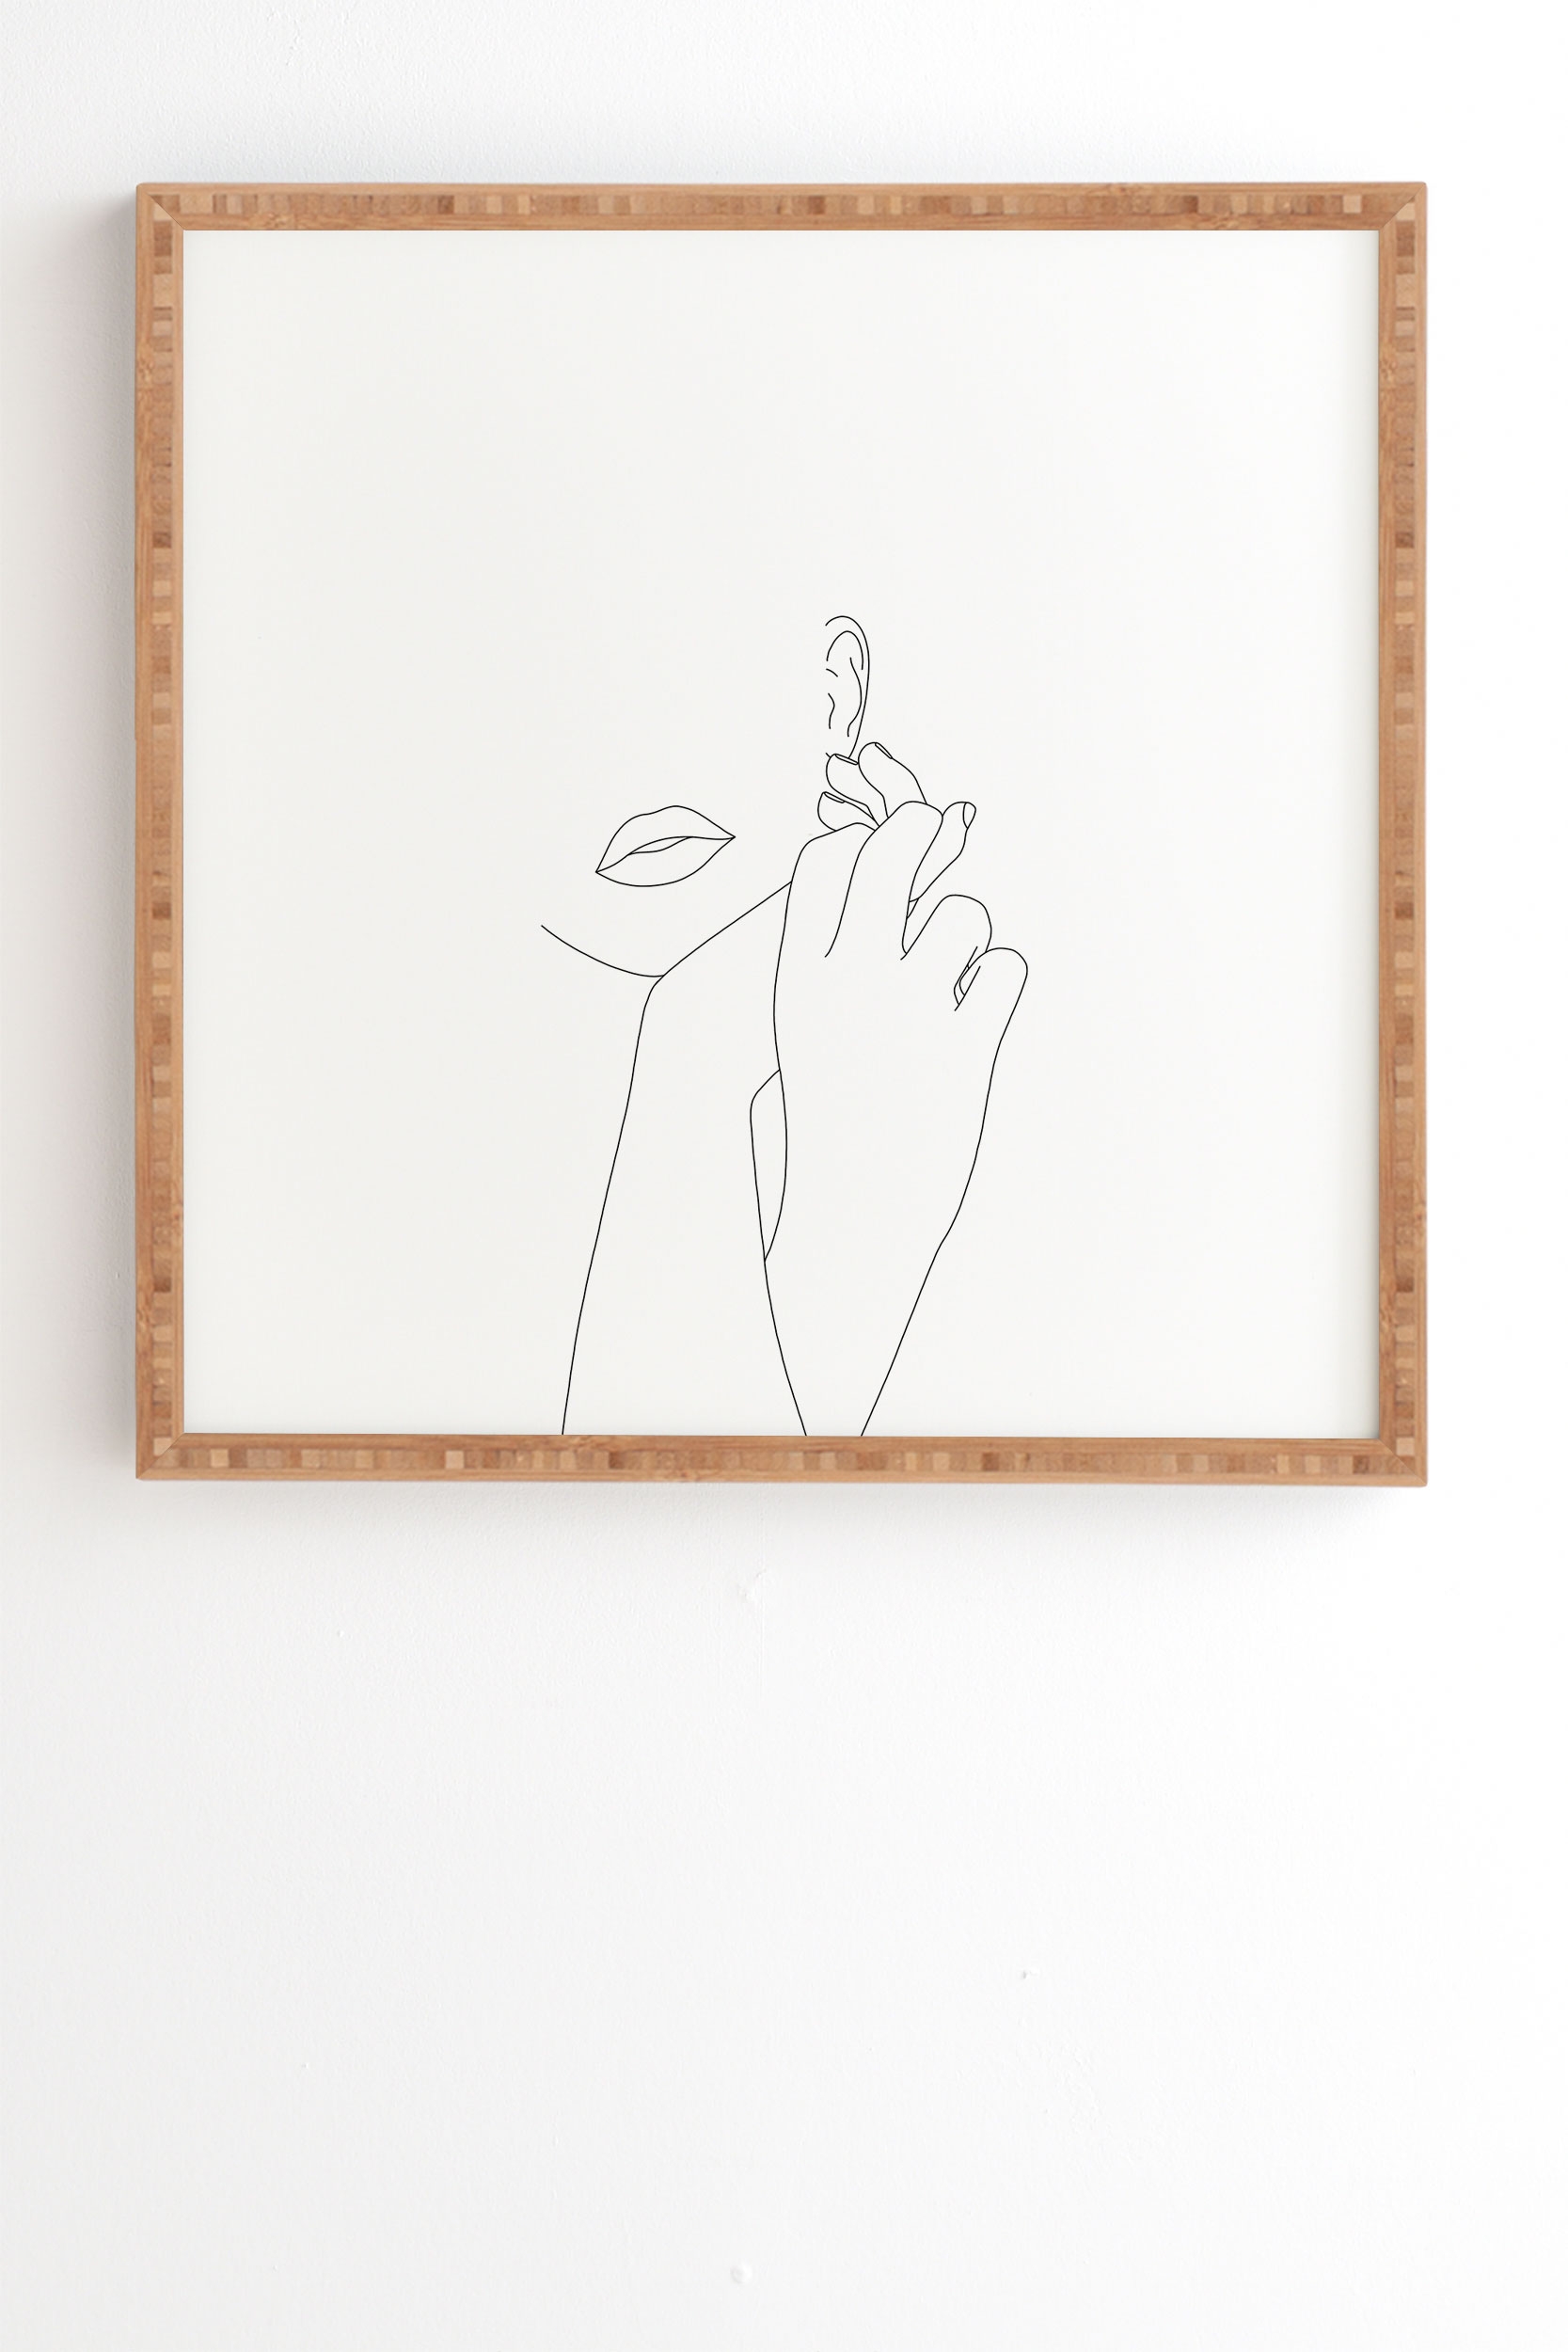 Minimalist Face Illustration by The Colour Study - Framed Wall Art Bamboo 19" x 22.4" - Image 1